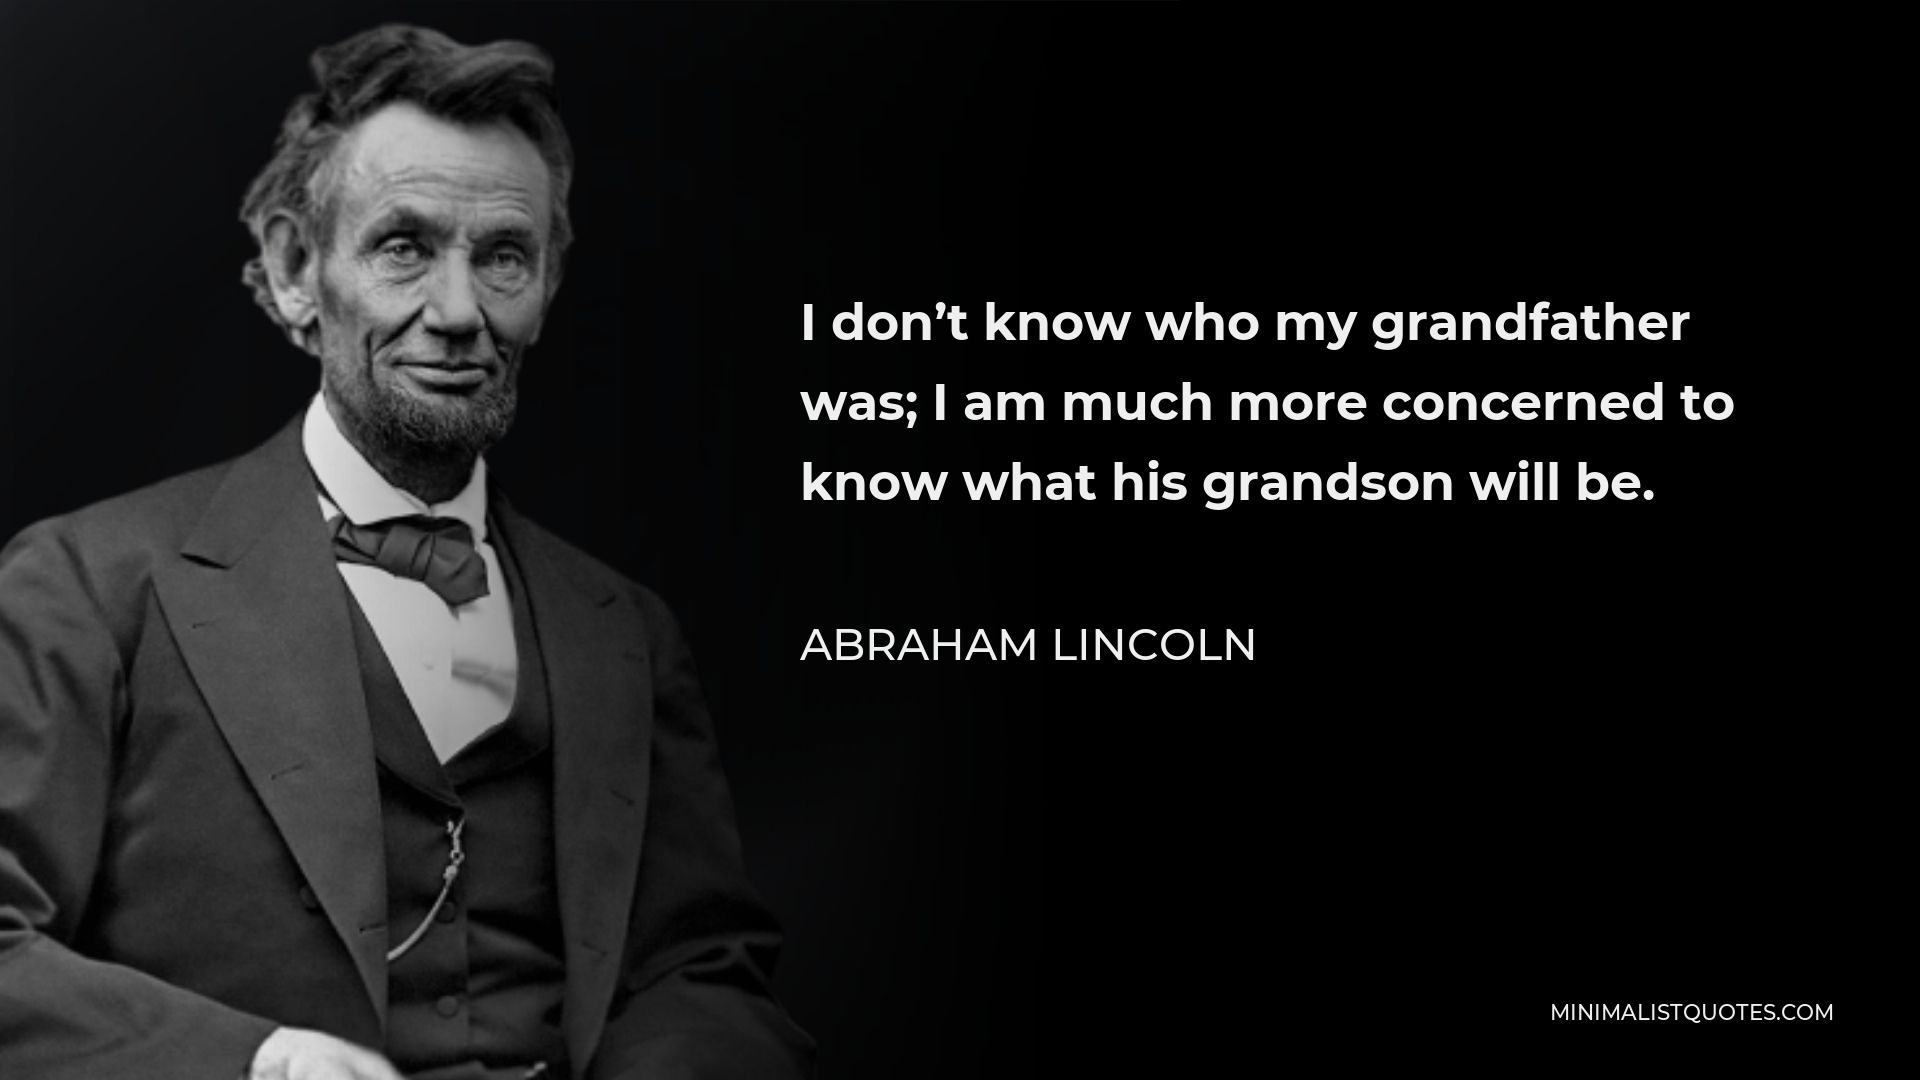 Abraham Lincoln Quote - I don’t know who my grandfather was; I am much more concerned to know what his grandson will be.